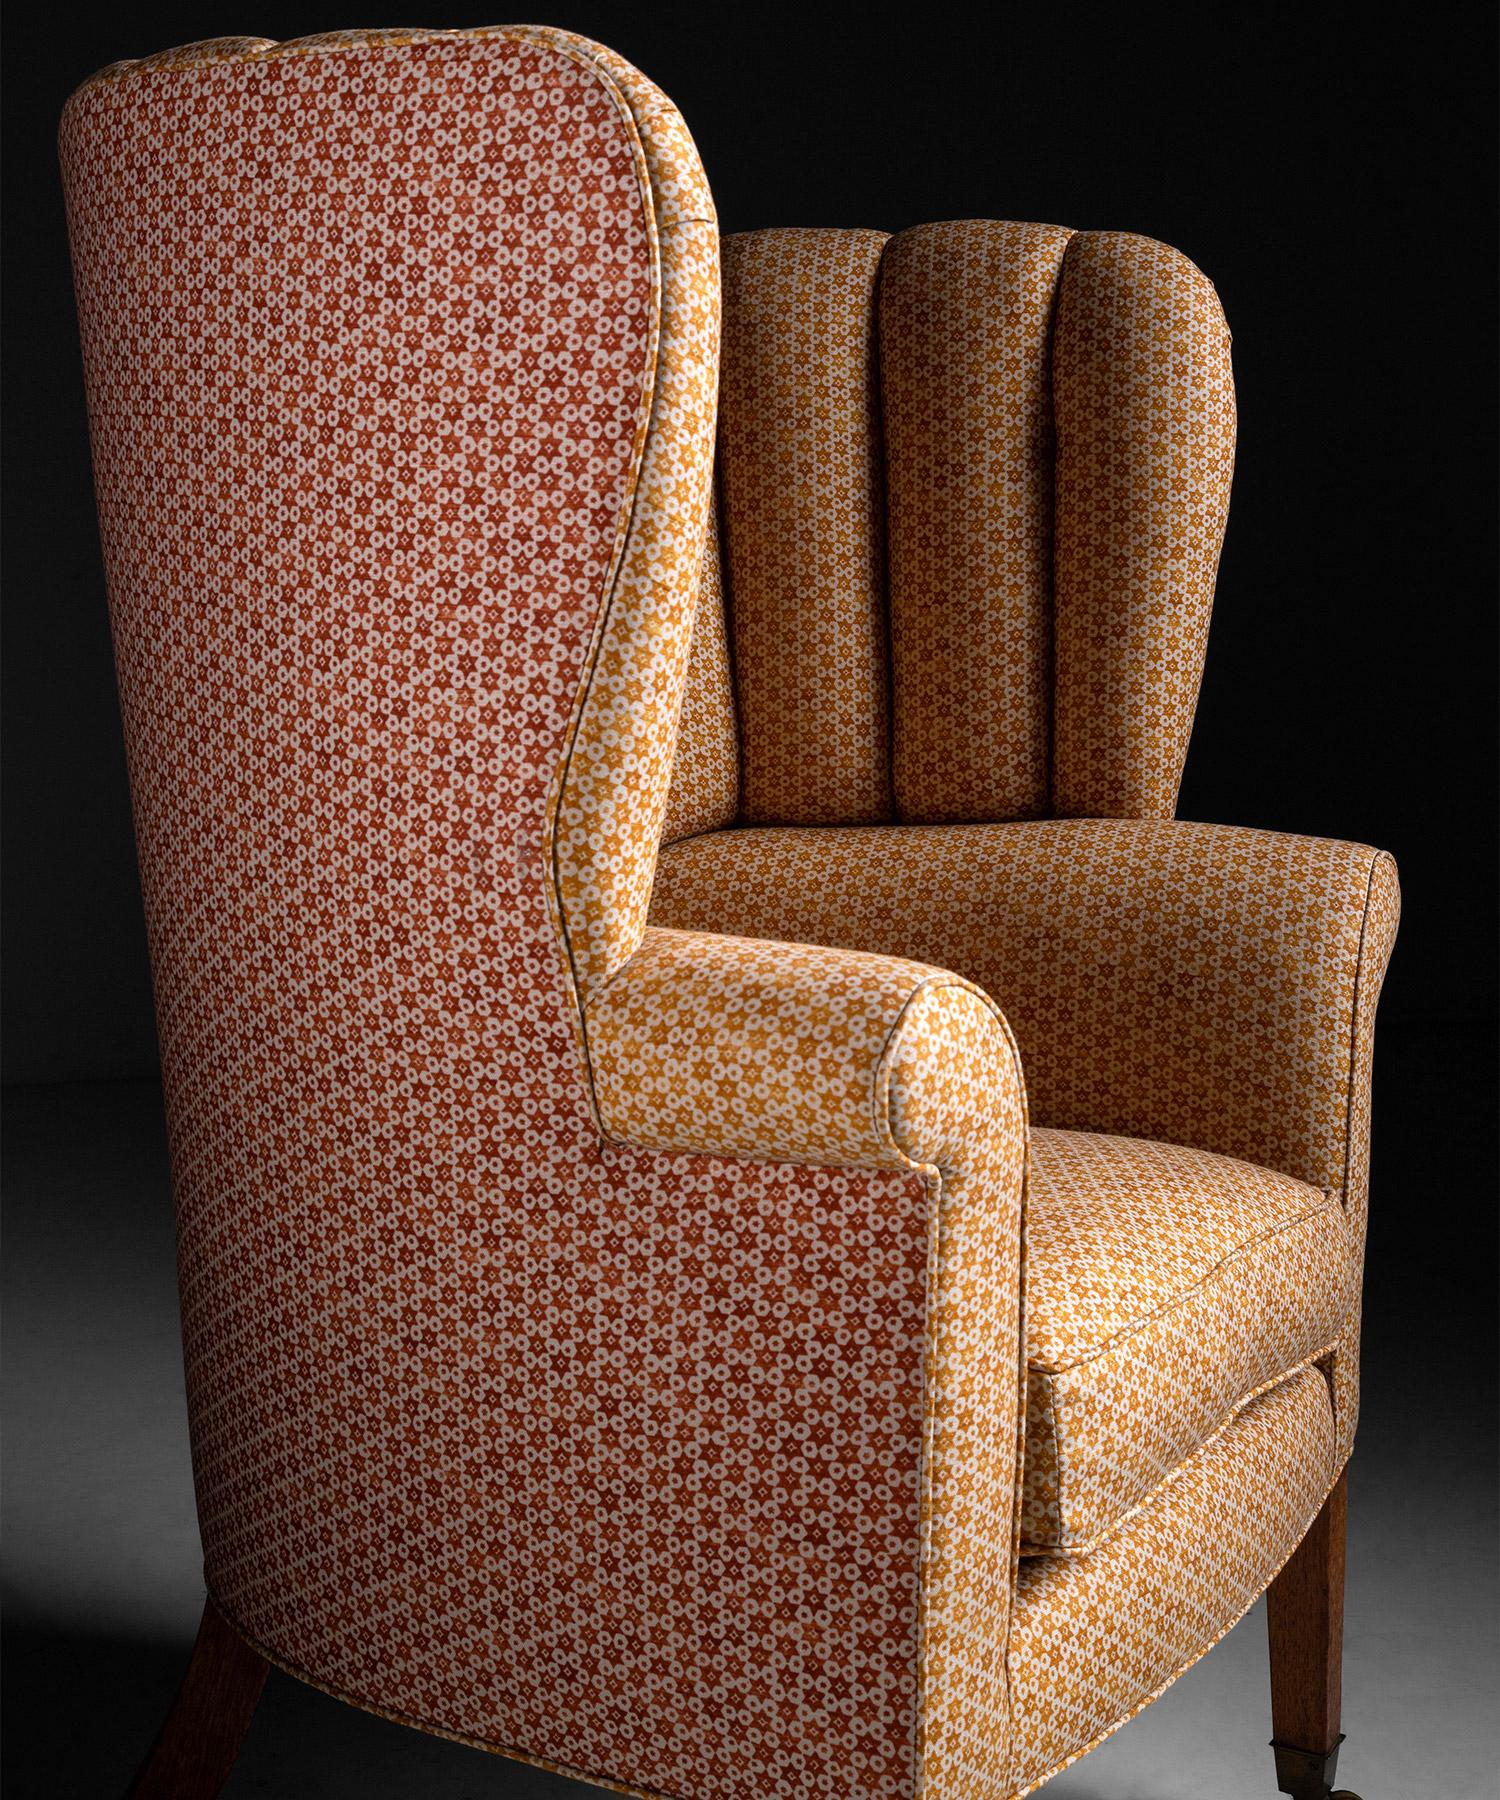 Barrel Back Chair in Patterned Linen by Zak + Fox, England, Circa 1810 1